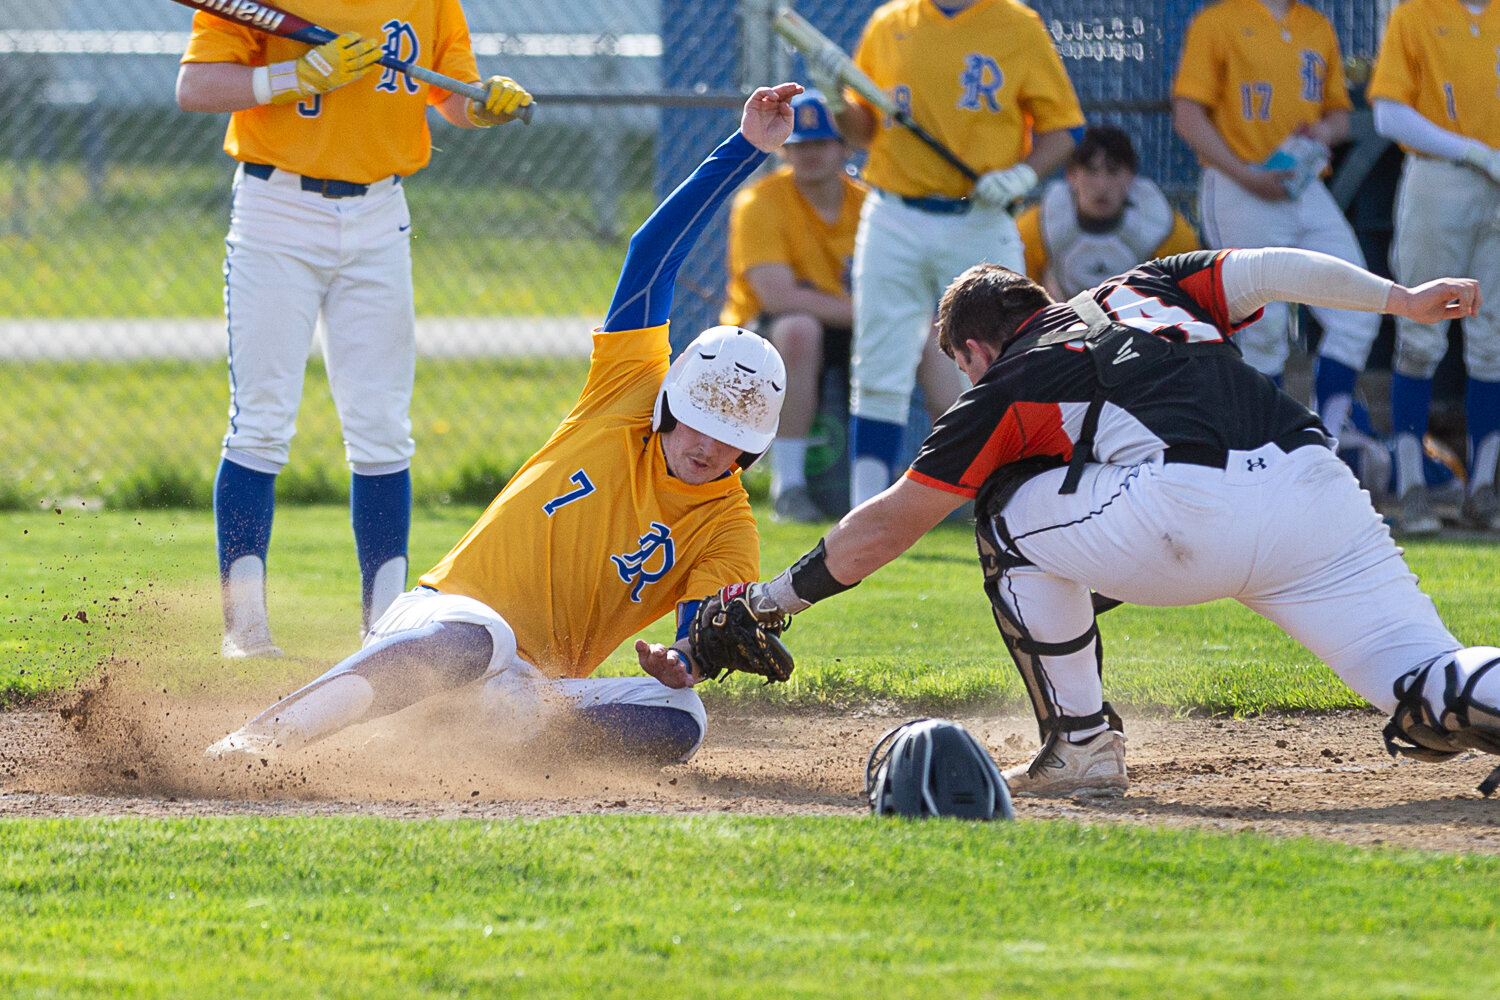 Rochester's Braden Hartley avoids the tag and slides home against Centralia April 26.